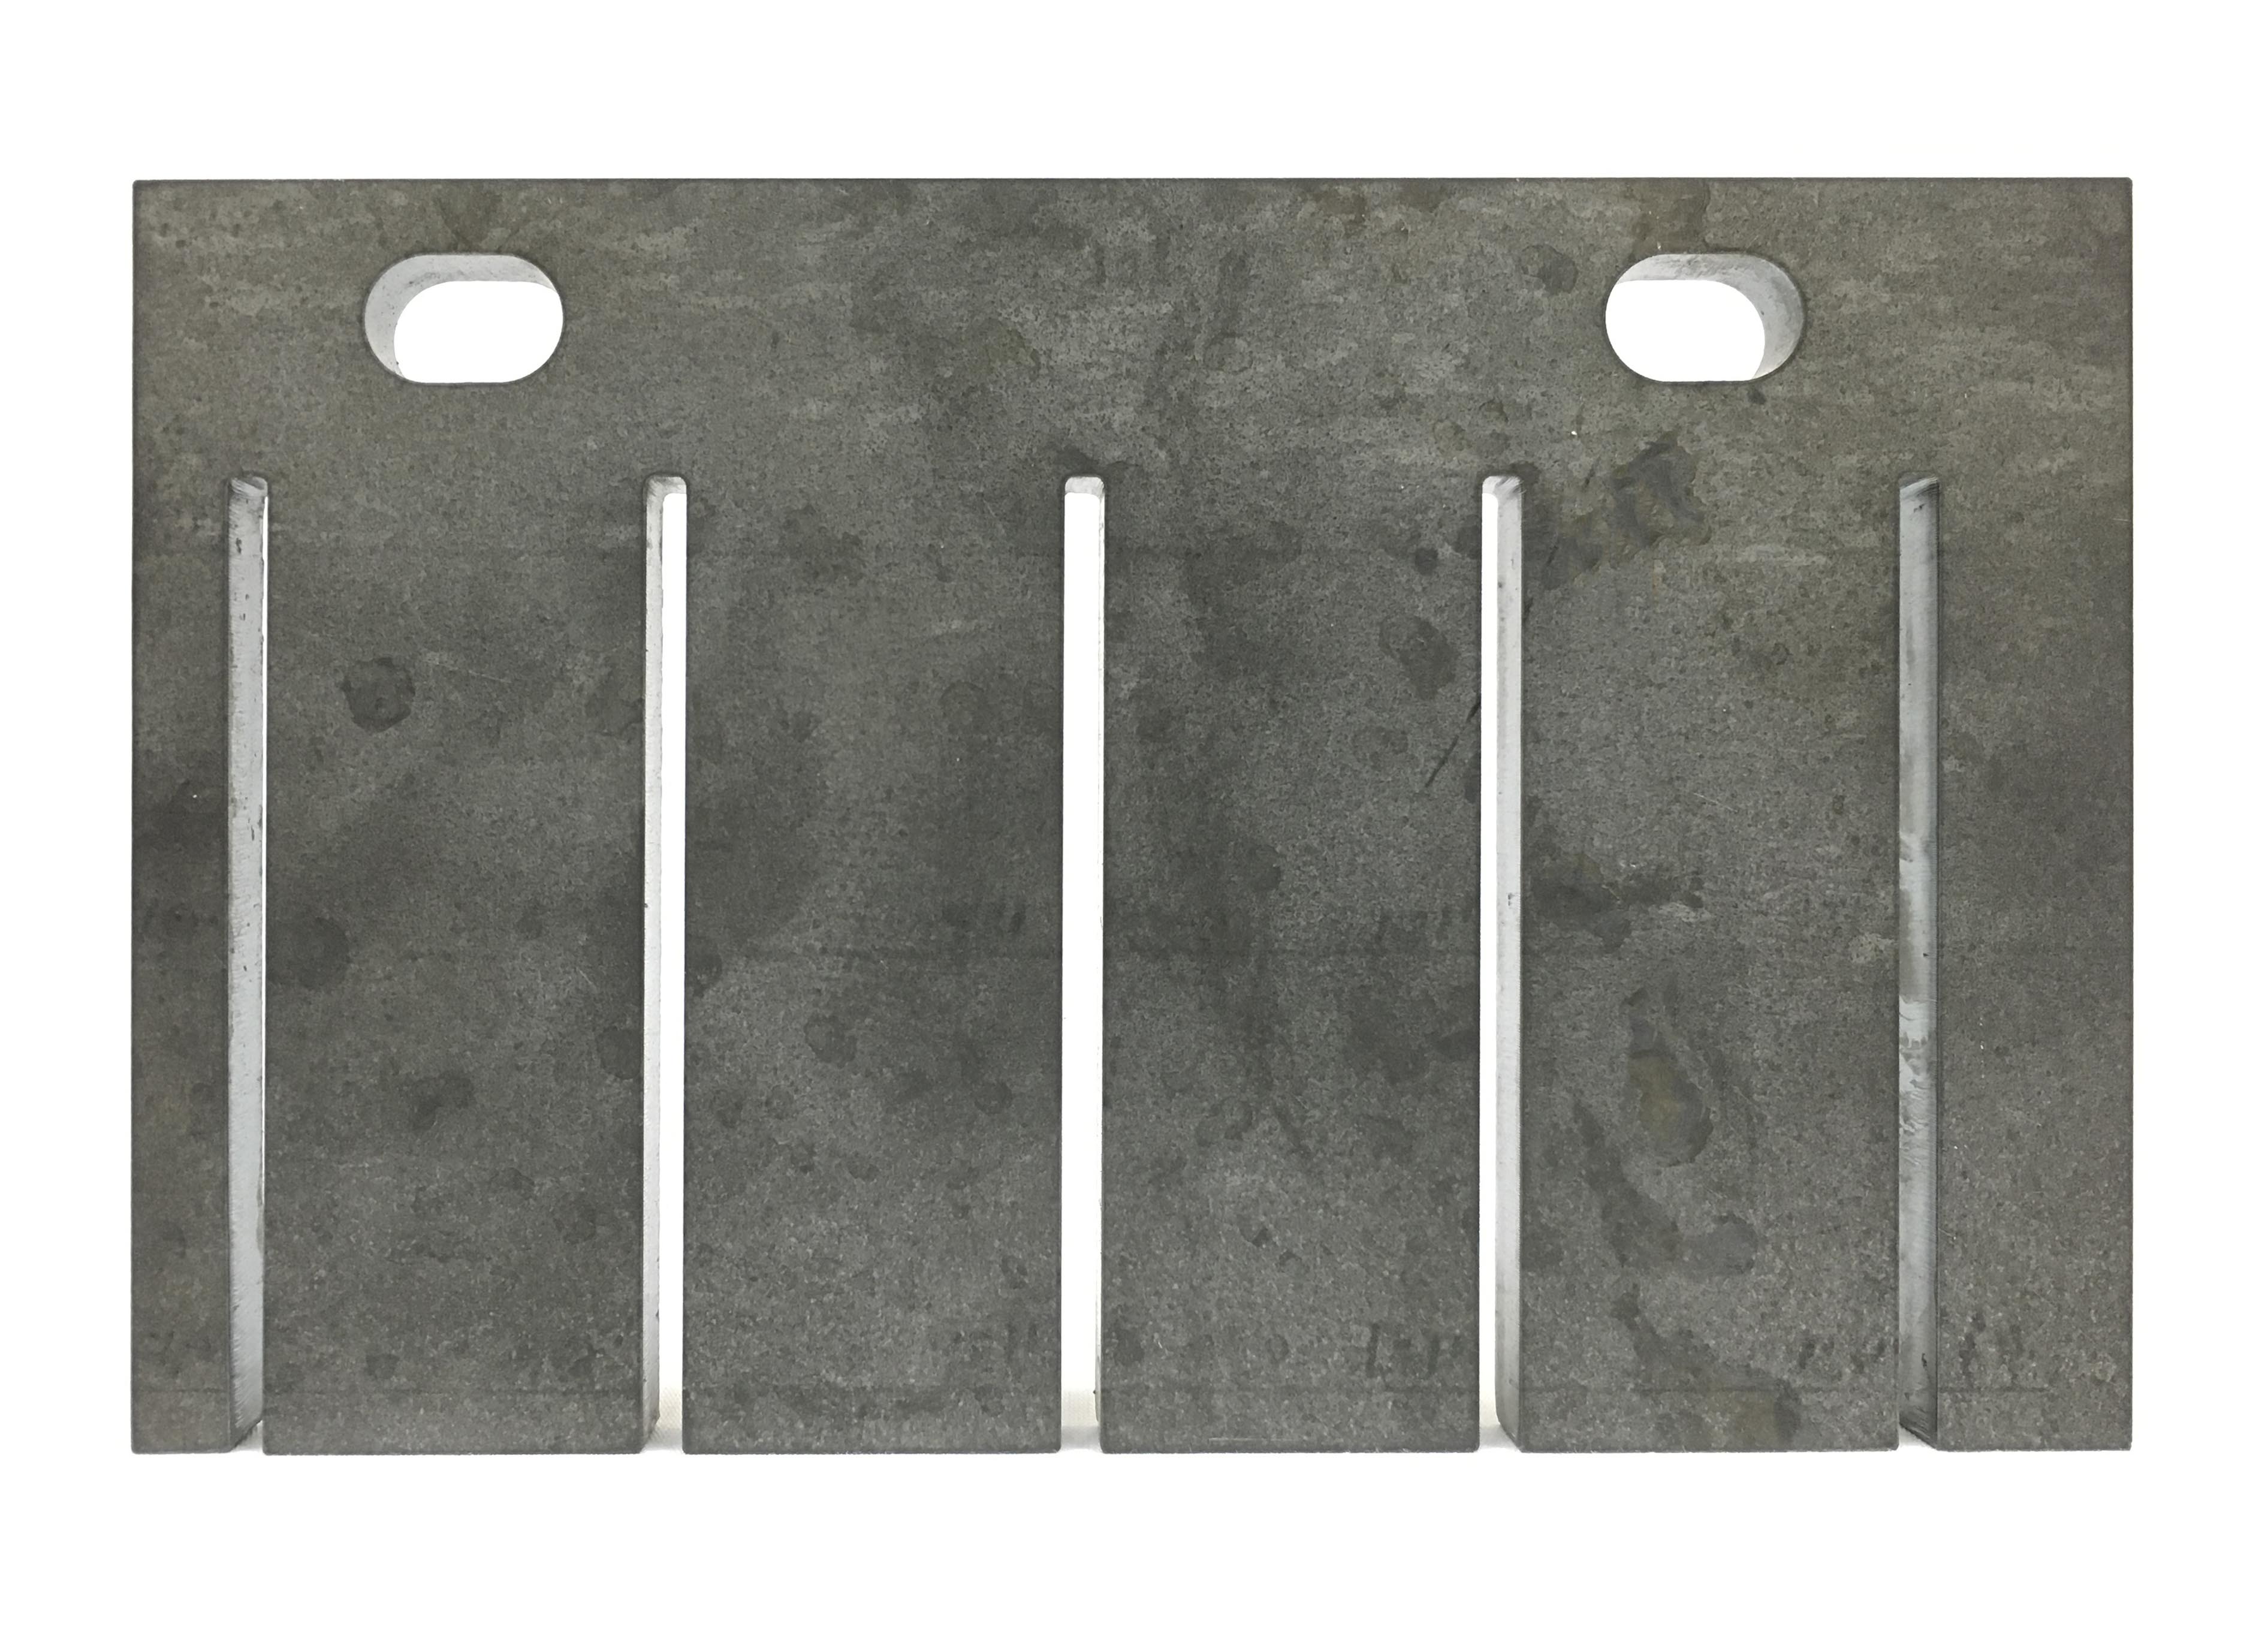 Carbon Steel - ⅜ in. plate—4 ½ in. x 7 in. with (2) equal round slots and (5) equal rectangular slots